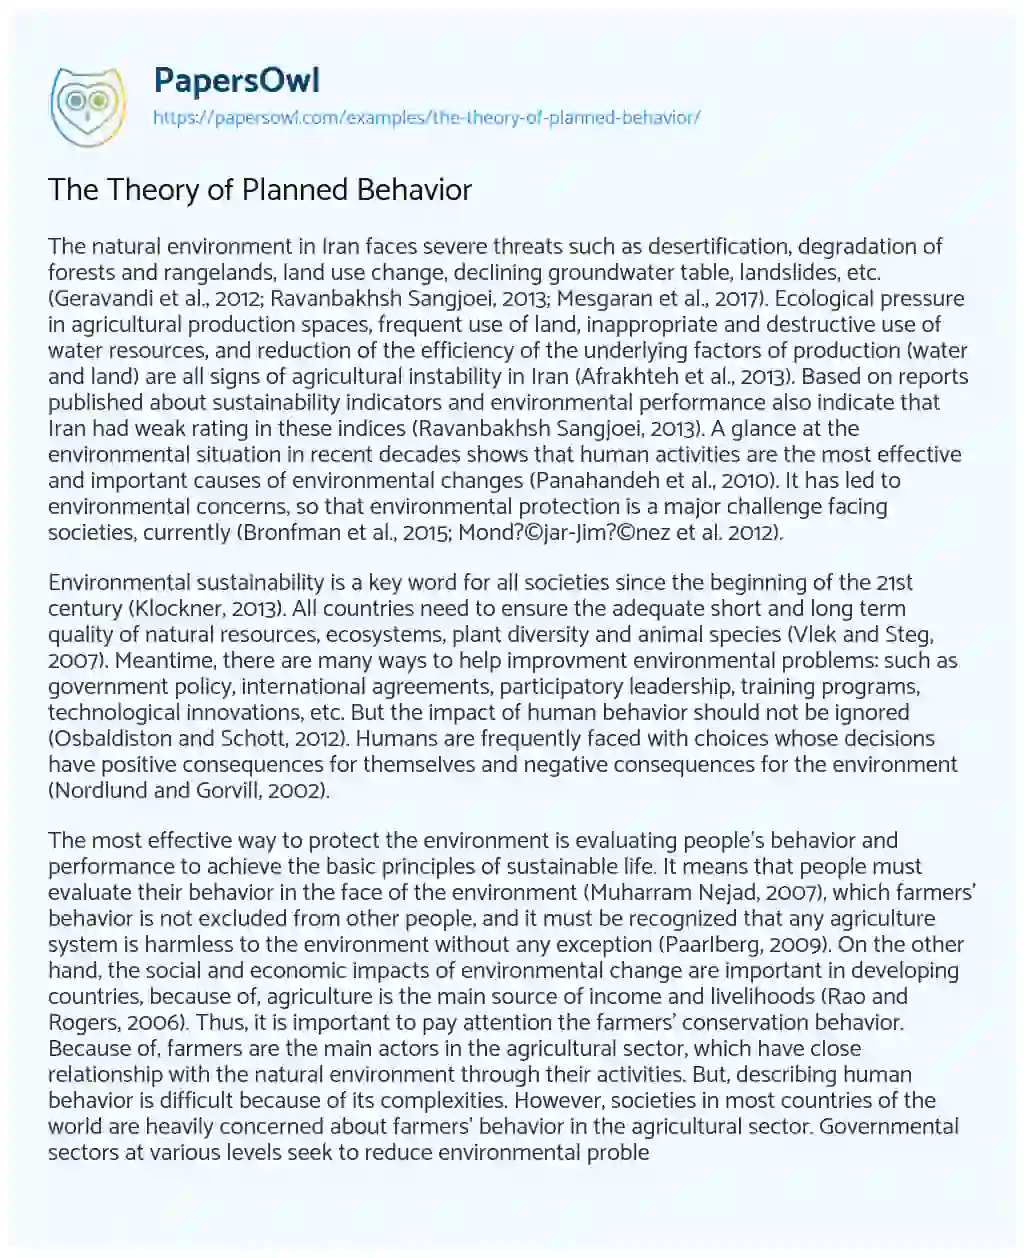 Essay on The Theory of Planned Behavior